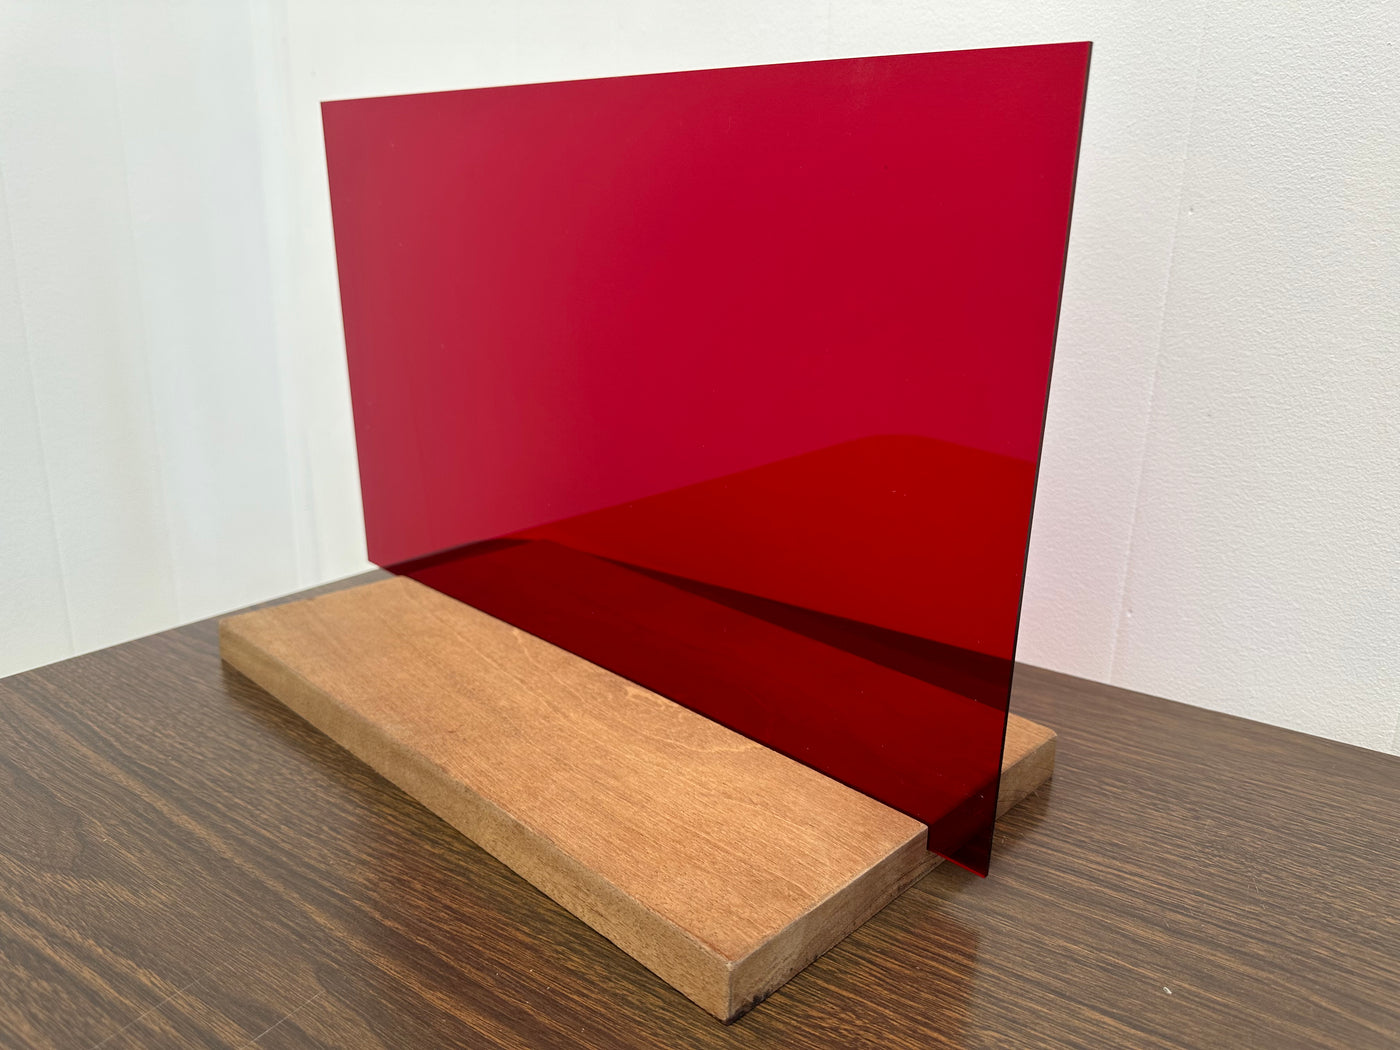 1/8" Translucent Red Acrylic (per sheet)